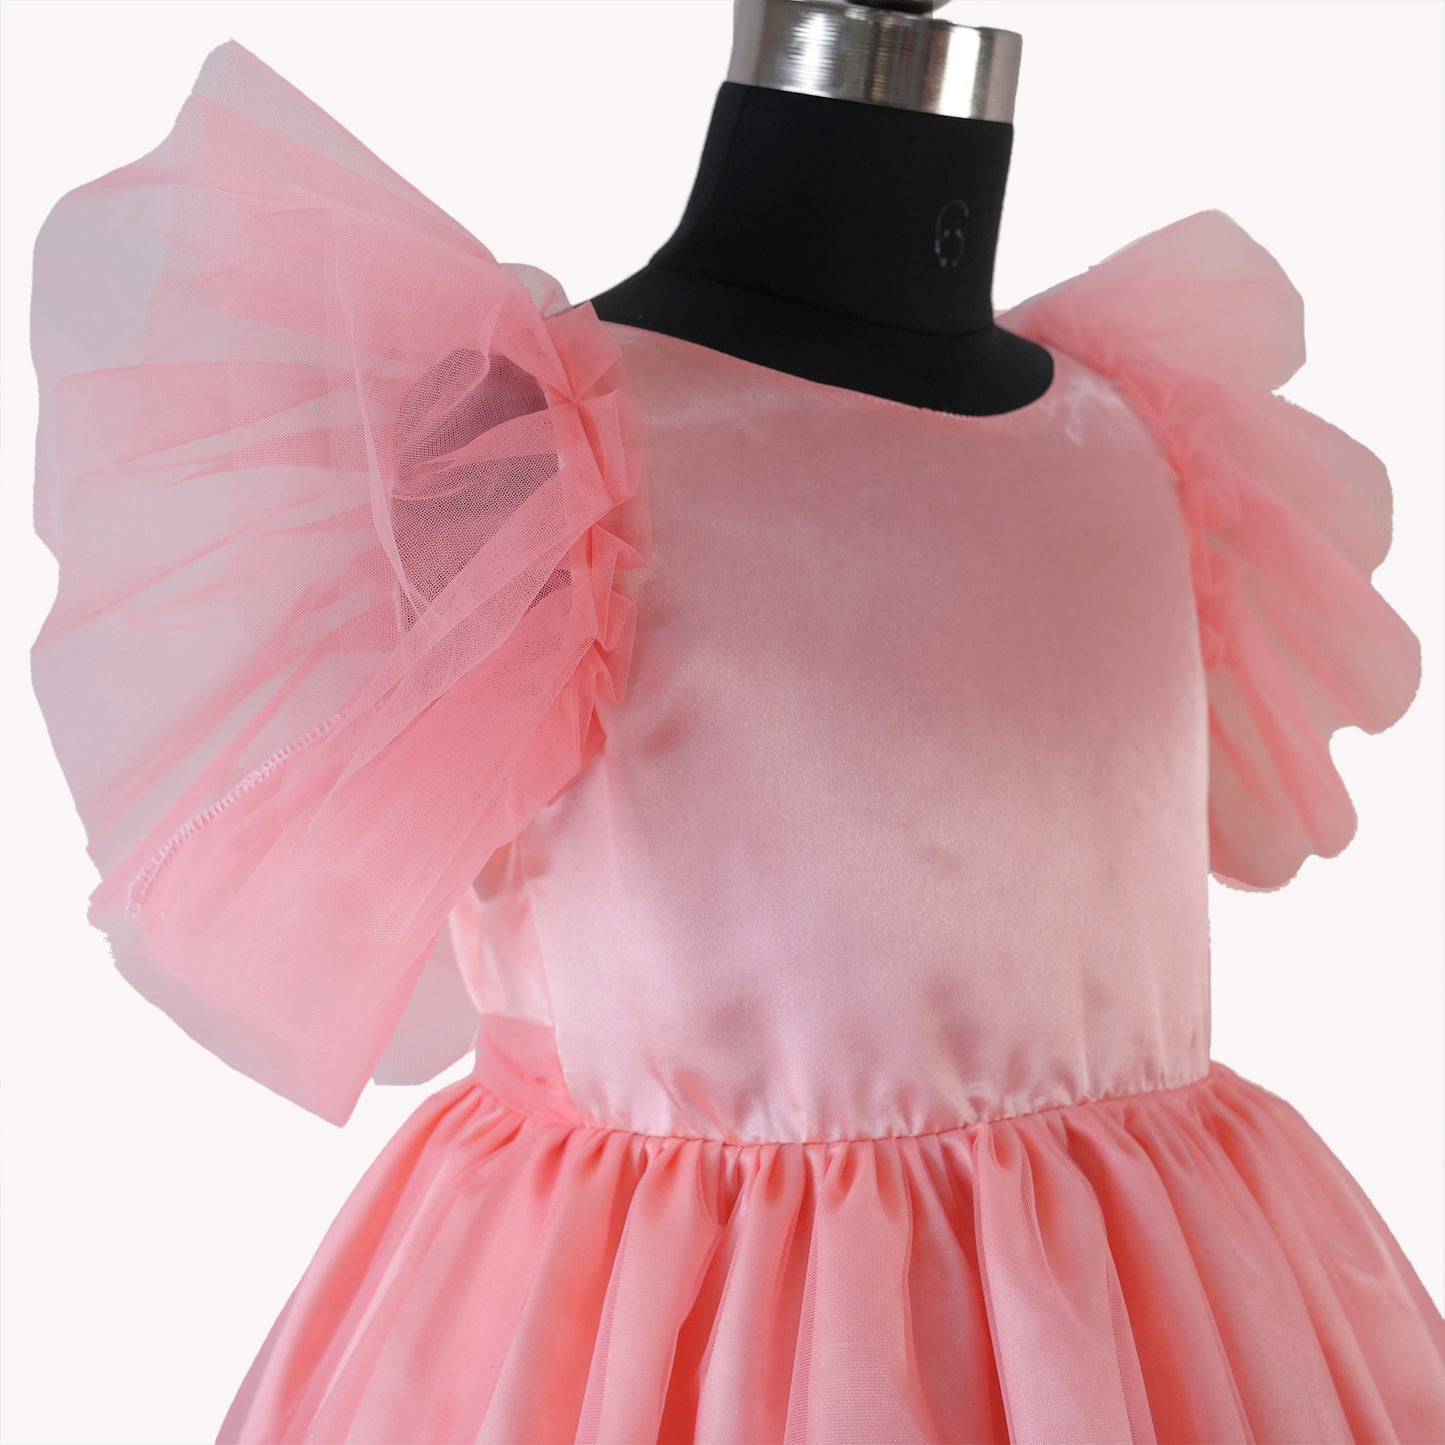 HEYKIDOO latest designer kids girls stylish peach solid frock comfortable Knee length birthday Party wear fashionable 6 years old unique most beautiful trendy candy dress buy online shopping India